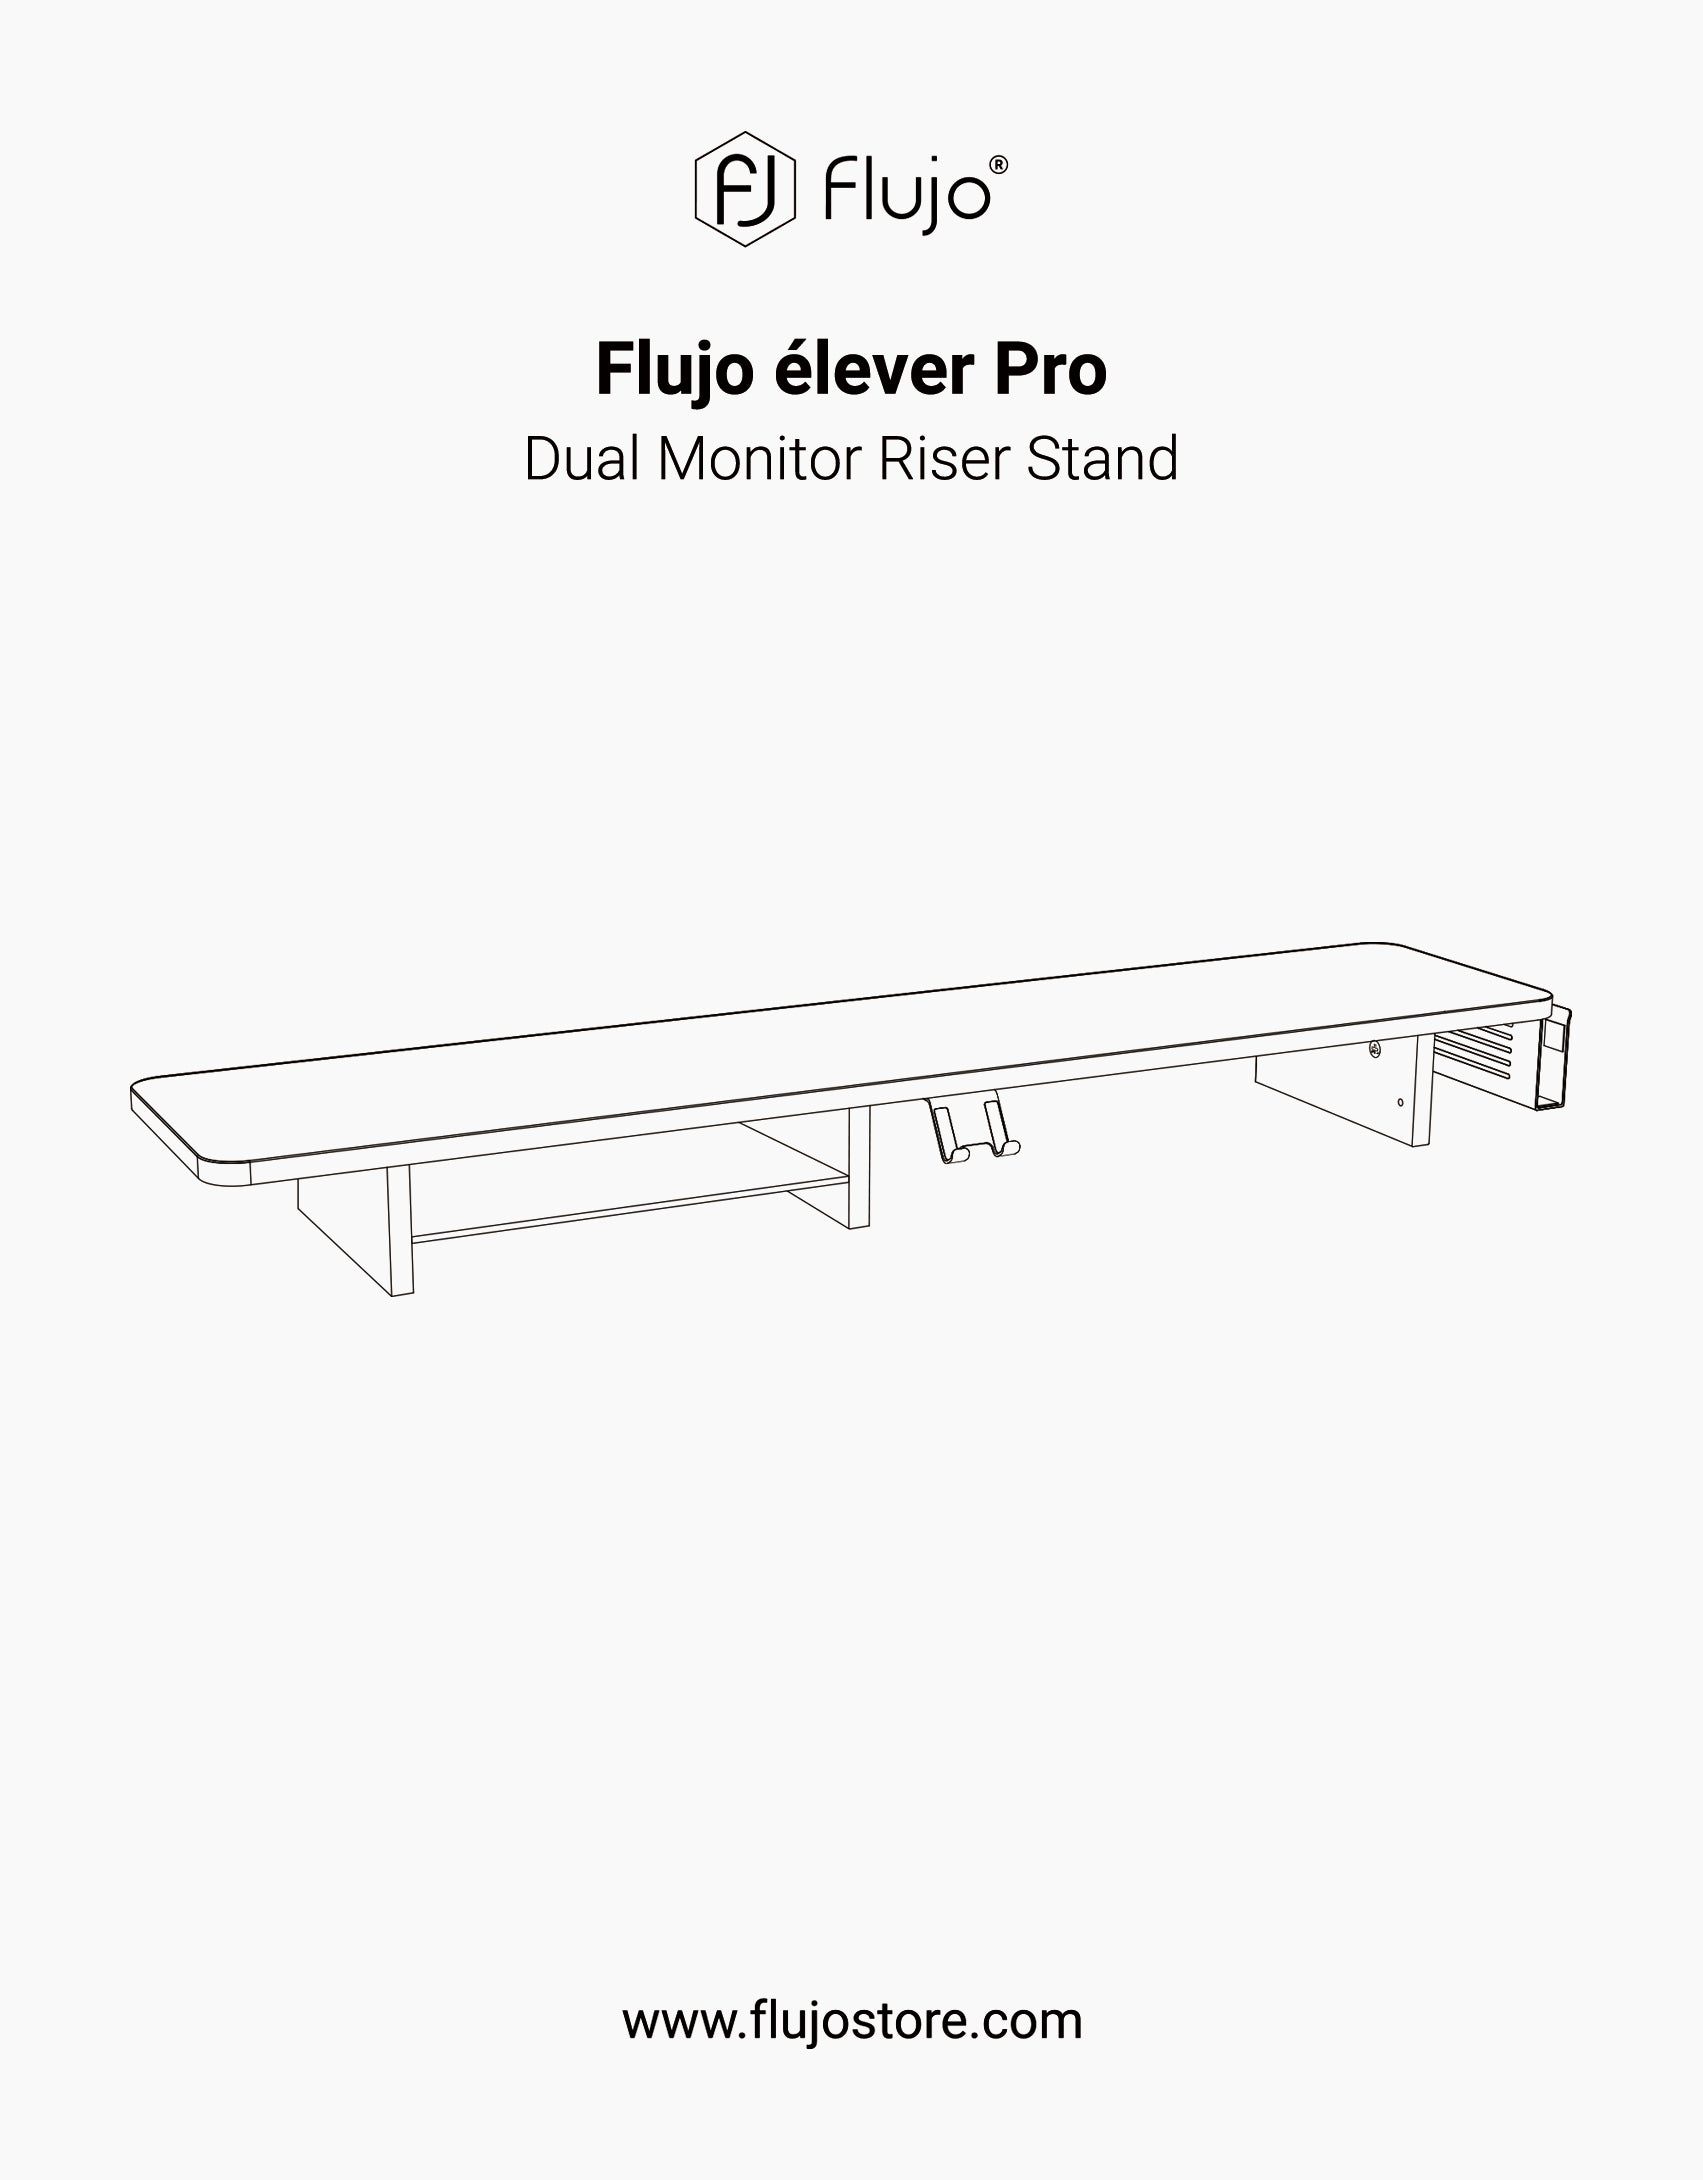 Technical drawing of the Flujo Élever Pro Dual Monitor Riser Stand, showing a long, sturdy platform for monitors, advertised on the Flujo online store.